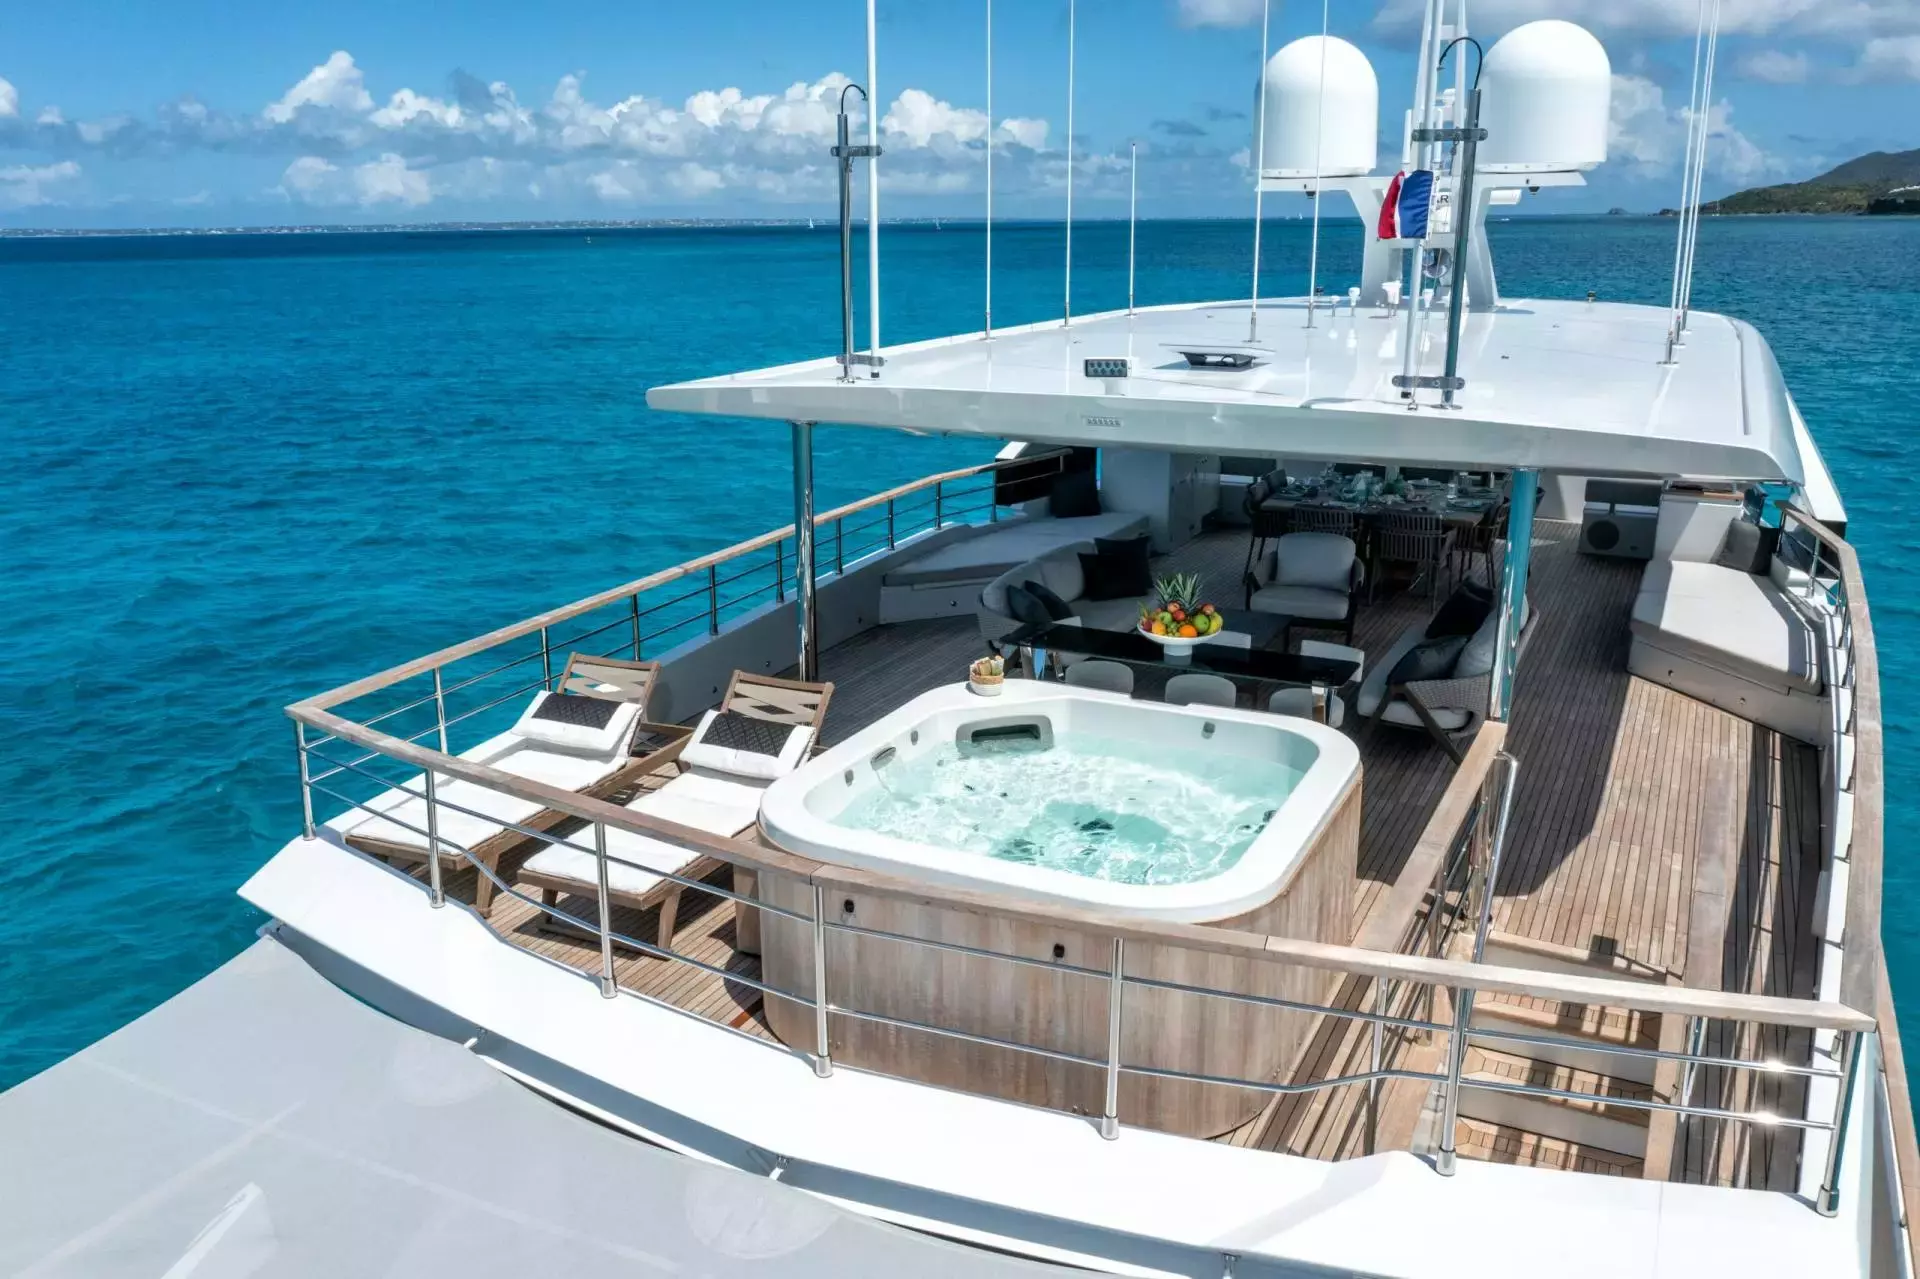 Rockit by Numarine - Top rates for a Charter of a private Superyacht in Anguilla